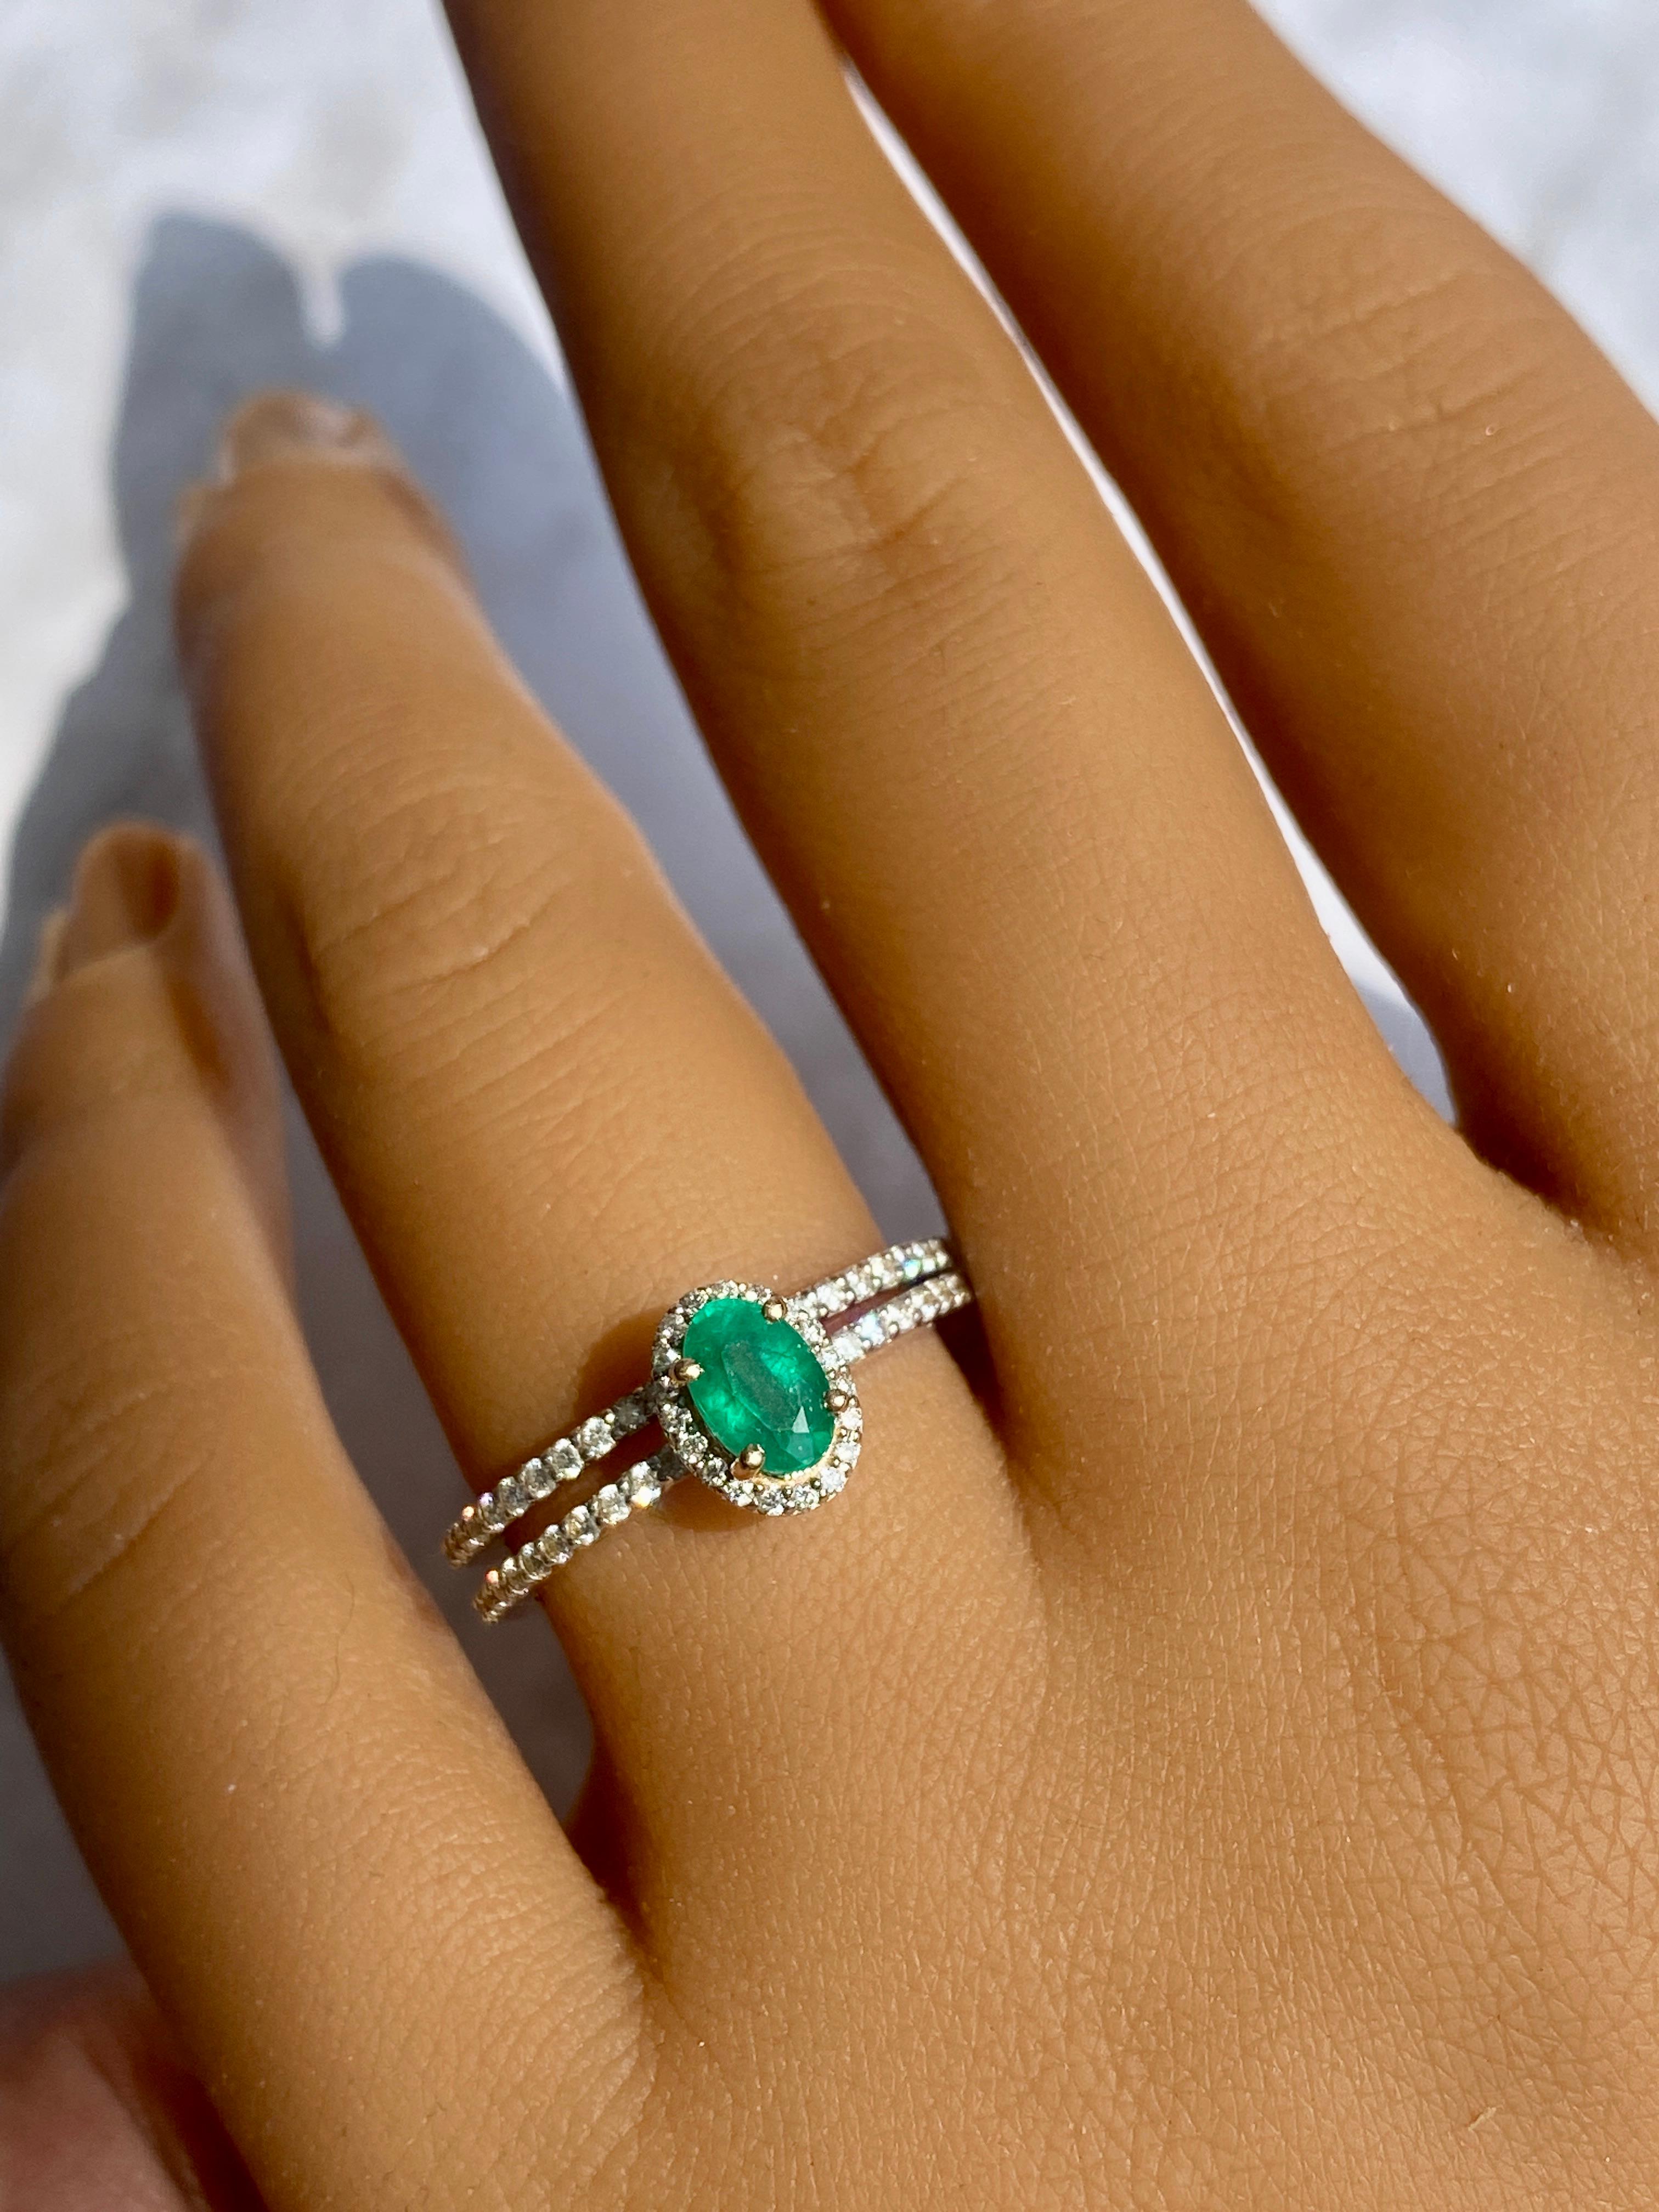 ** Each ring is sold separately **

Emerald Ring: 
14K Yellow Gold- 3.34 Grams 
Oval Emerald- 0.58 CTS / 1 PC
Round Diamonds- 0.42ct / 64 PCS

Ruby Ring:
14K Yellow Gold- 3.29 Grams 
Oval Ruby- 0.57 cts / 1 PC
Round Diamonds- 0.42 CTS / 64 OCS

Blue